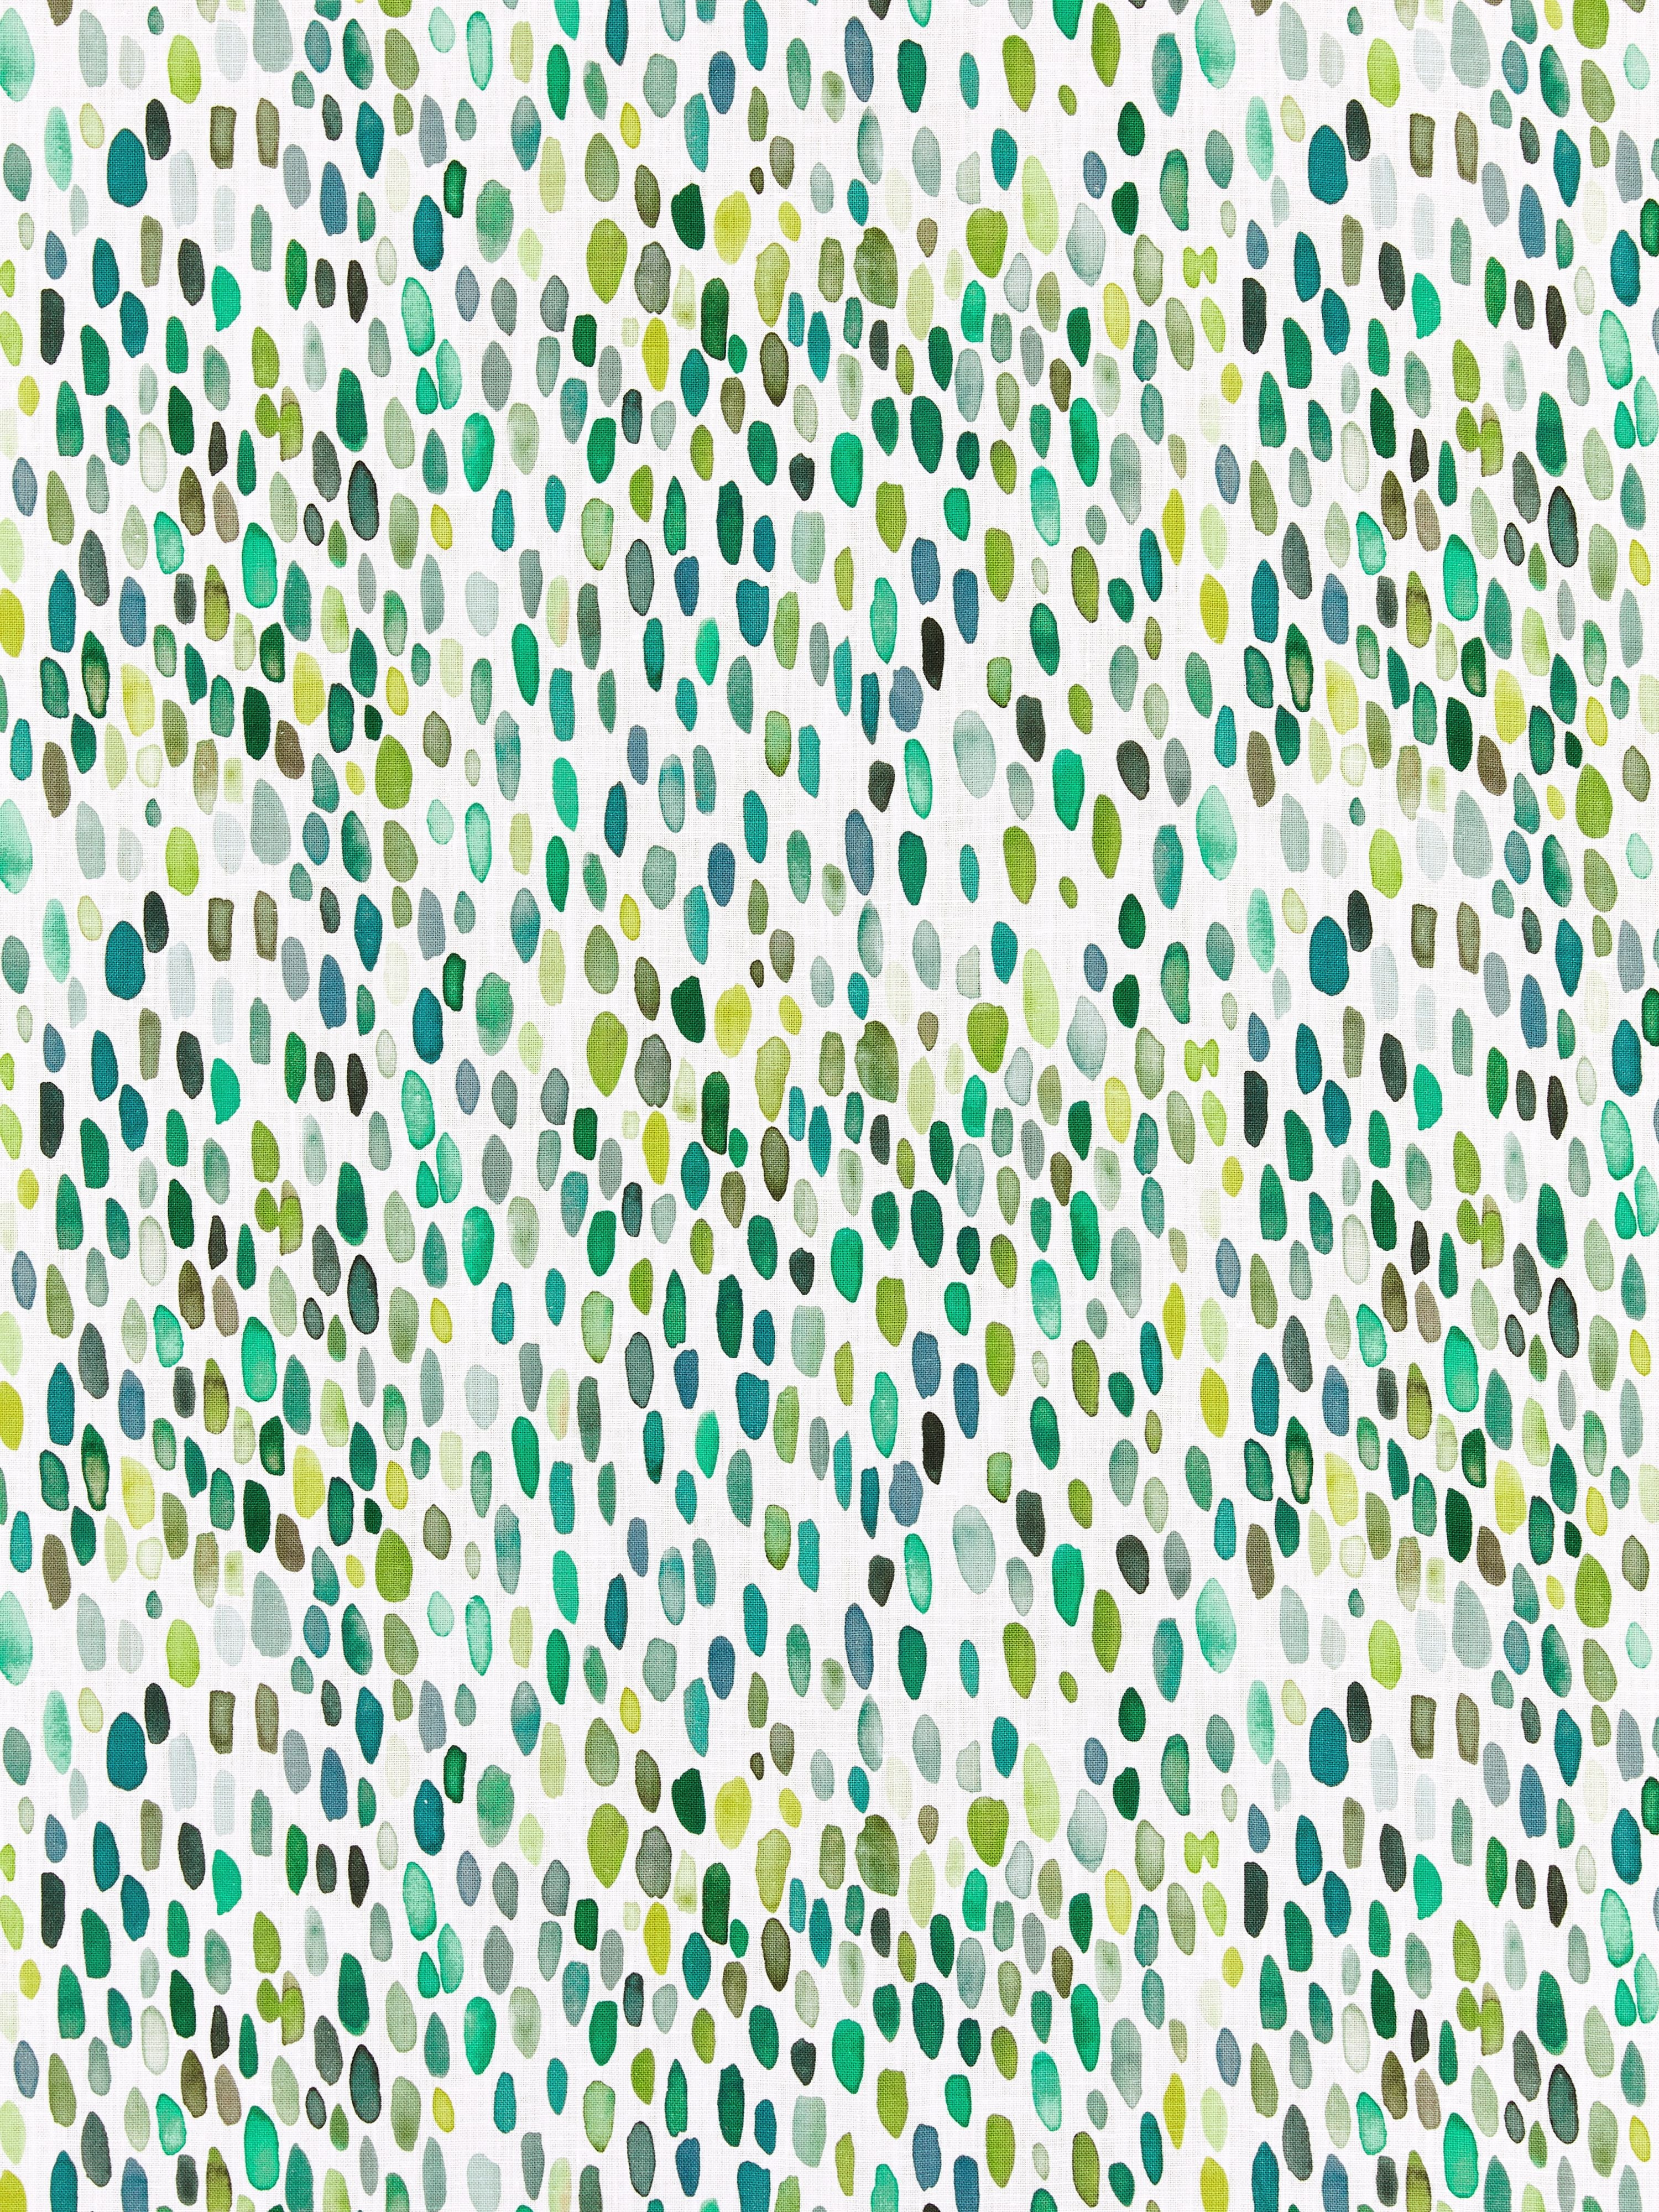 Jamboree Linen Print fabric in grasshopper color - pattern number LO 00065096 - by Scalamandre in the Old World Weavers collection